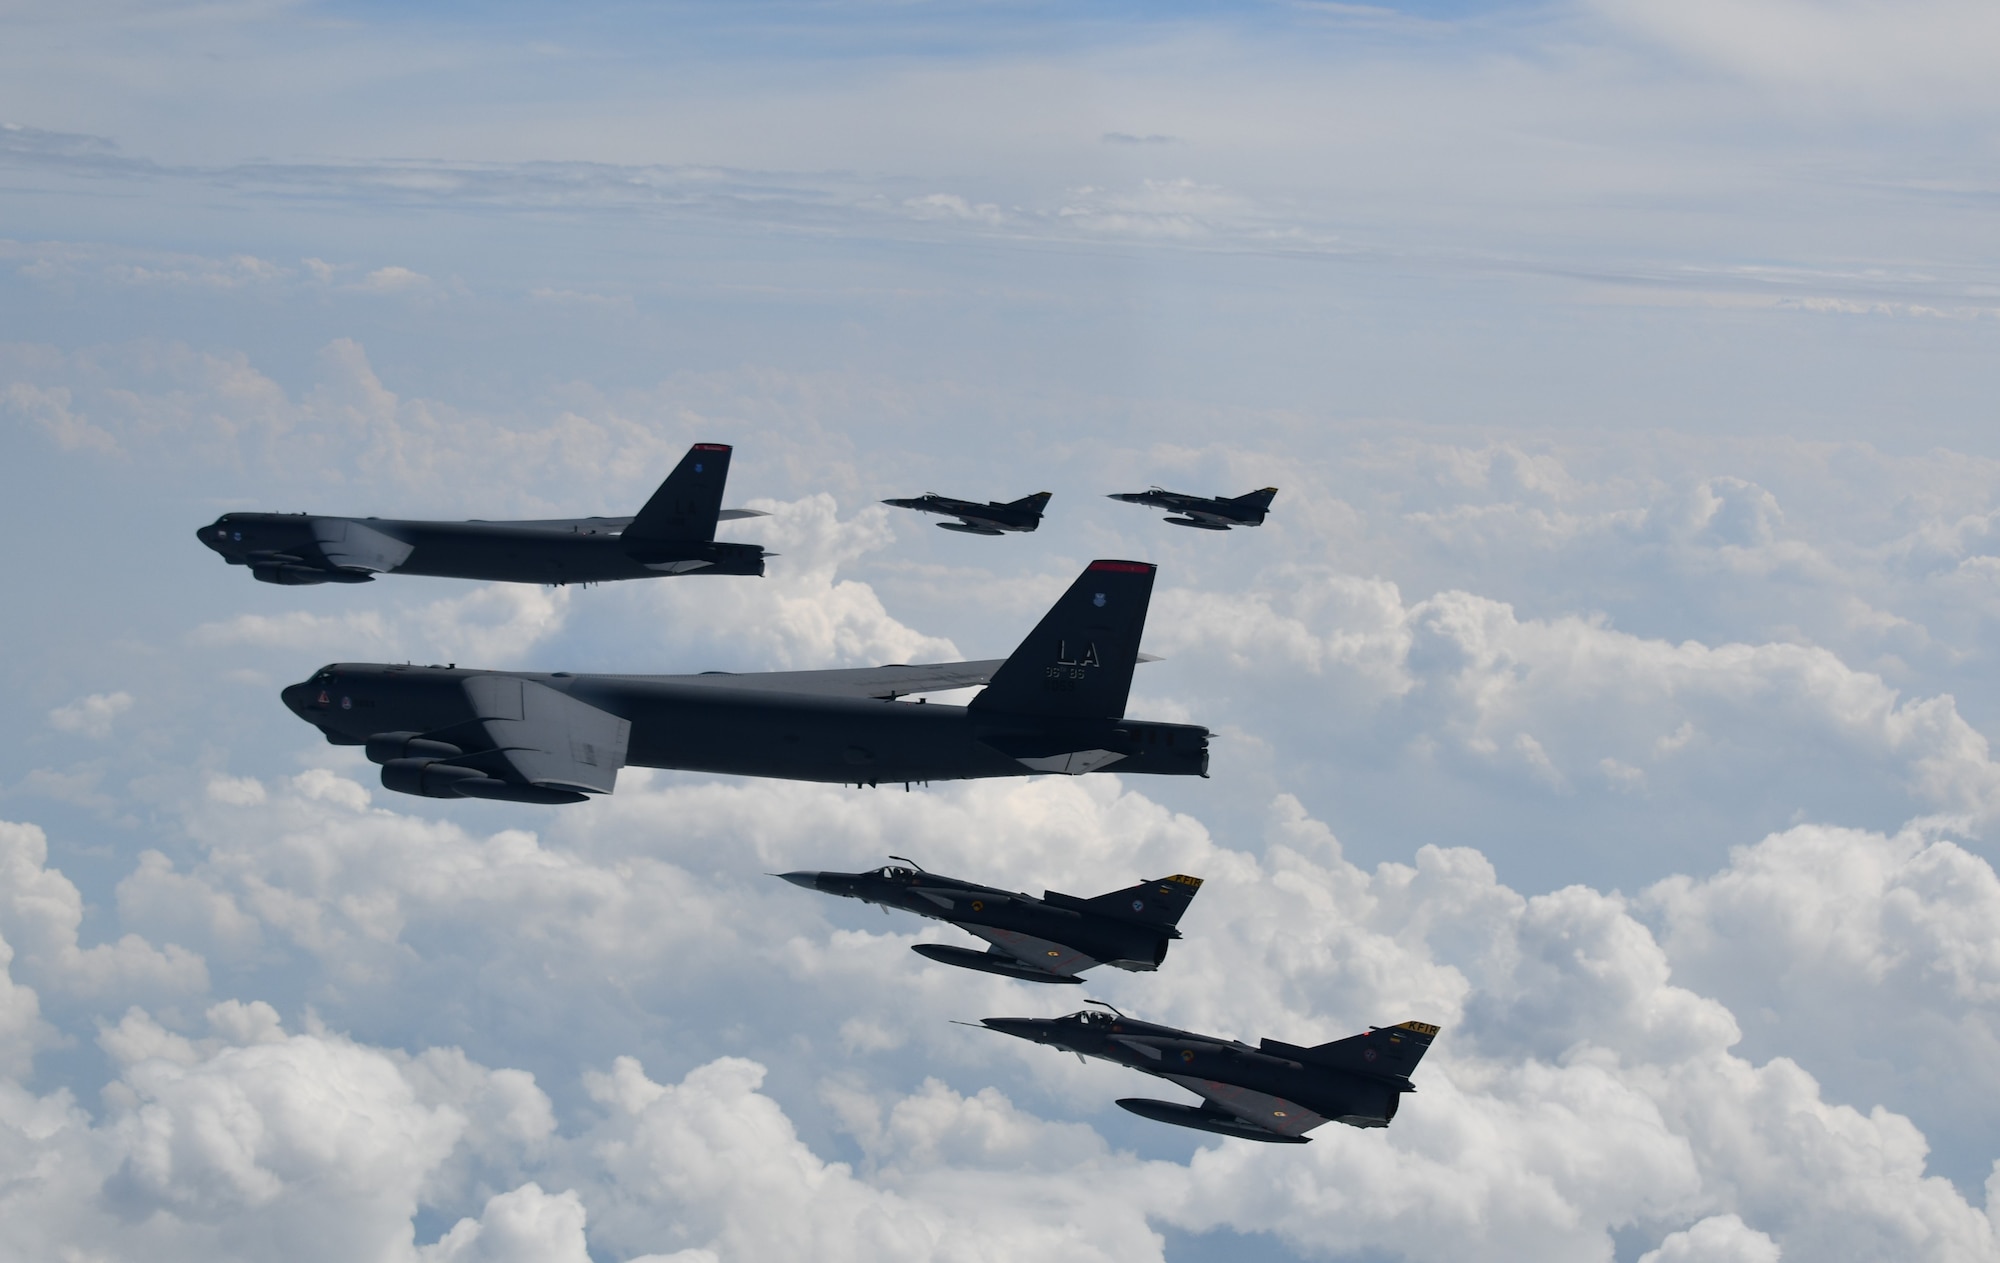 Two U.S. Air Force B-52H Stratofortress and Colombian Air Force Kfirs fighter aircraft participate in Brother’s Shield a Colombian Air Force lead exercise in Colombian airspace while in the U.S. Southern Command’s Area of Responsibility Nov 8, 2020. Brother’s Shield was accomplished on the Colombian Air Forces 101st anniversary. The B-52H crews supported the Colombian Air Force Kfir fighter aircraft pilots in air to air interception training while developing interoperability capabilities in order to increase hemispheric security and regional stability, under NATO standards between the U.S. and Colombia. (Colombian Air Force courtesy photo)